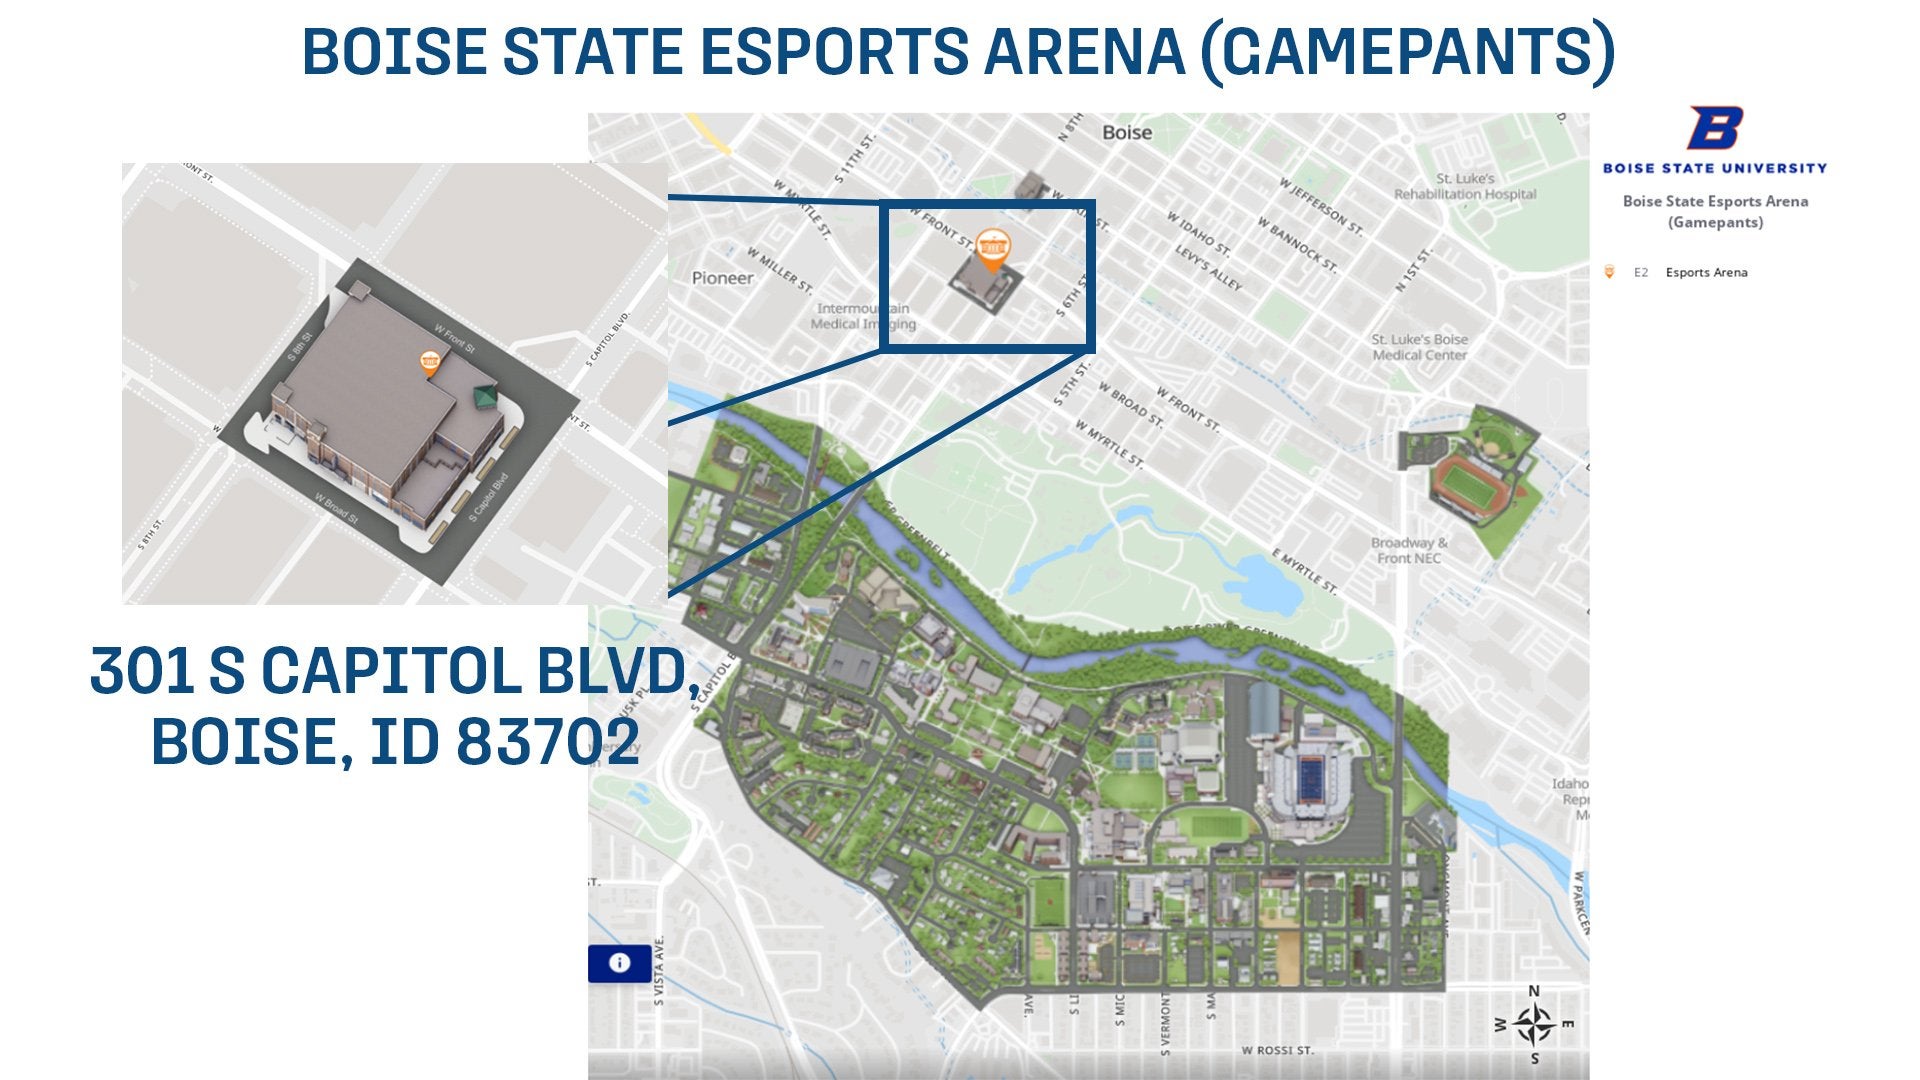 A map of where the BSU esports arena is located